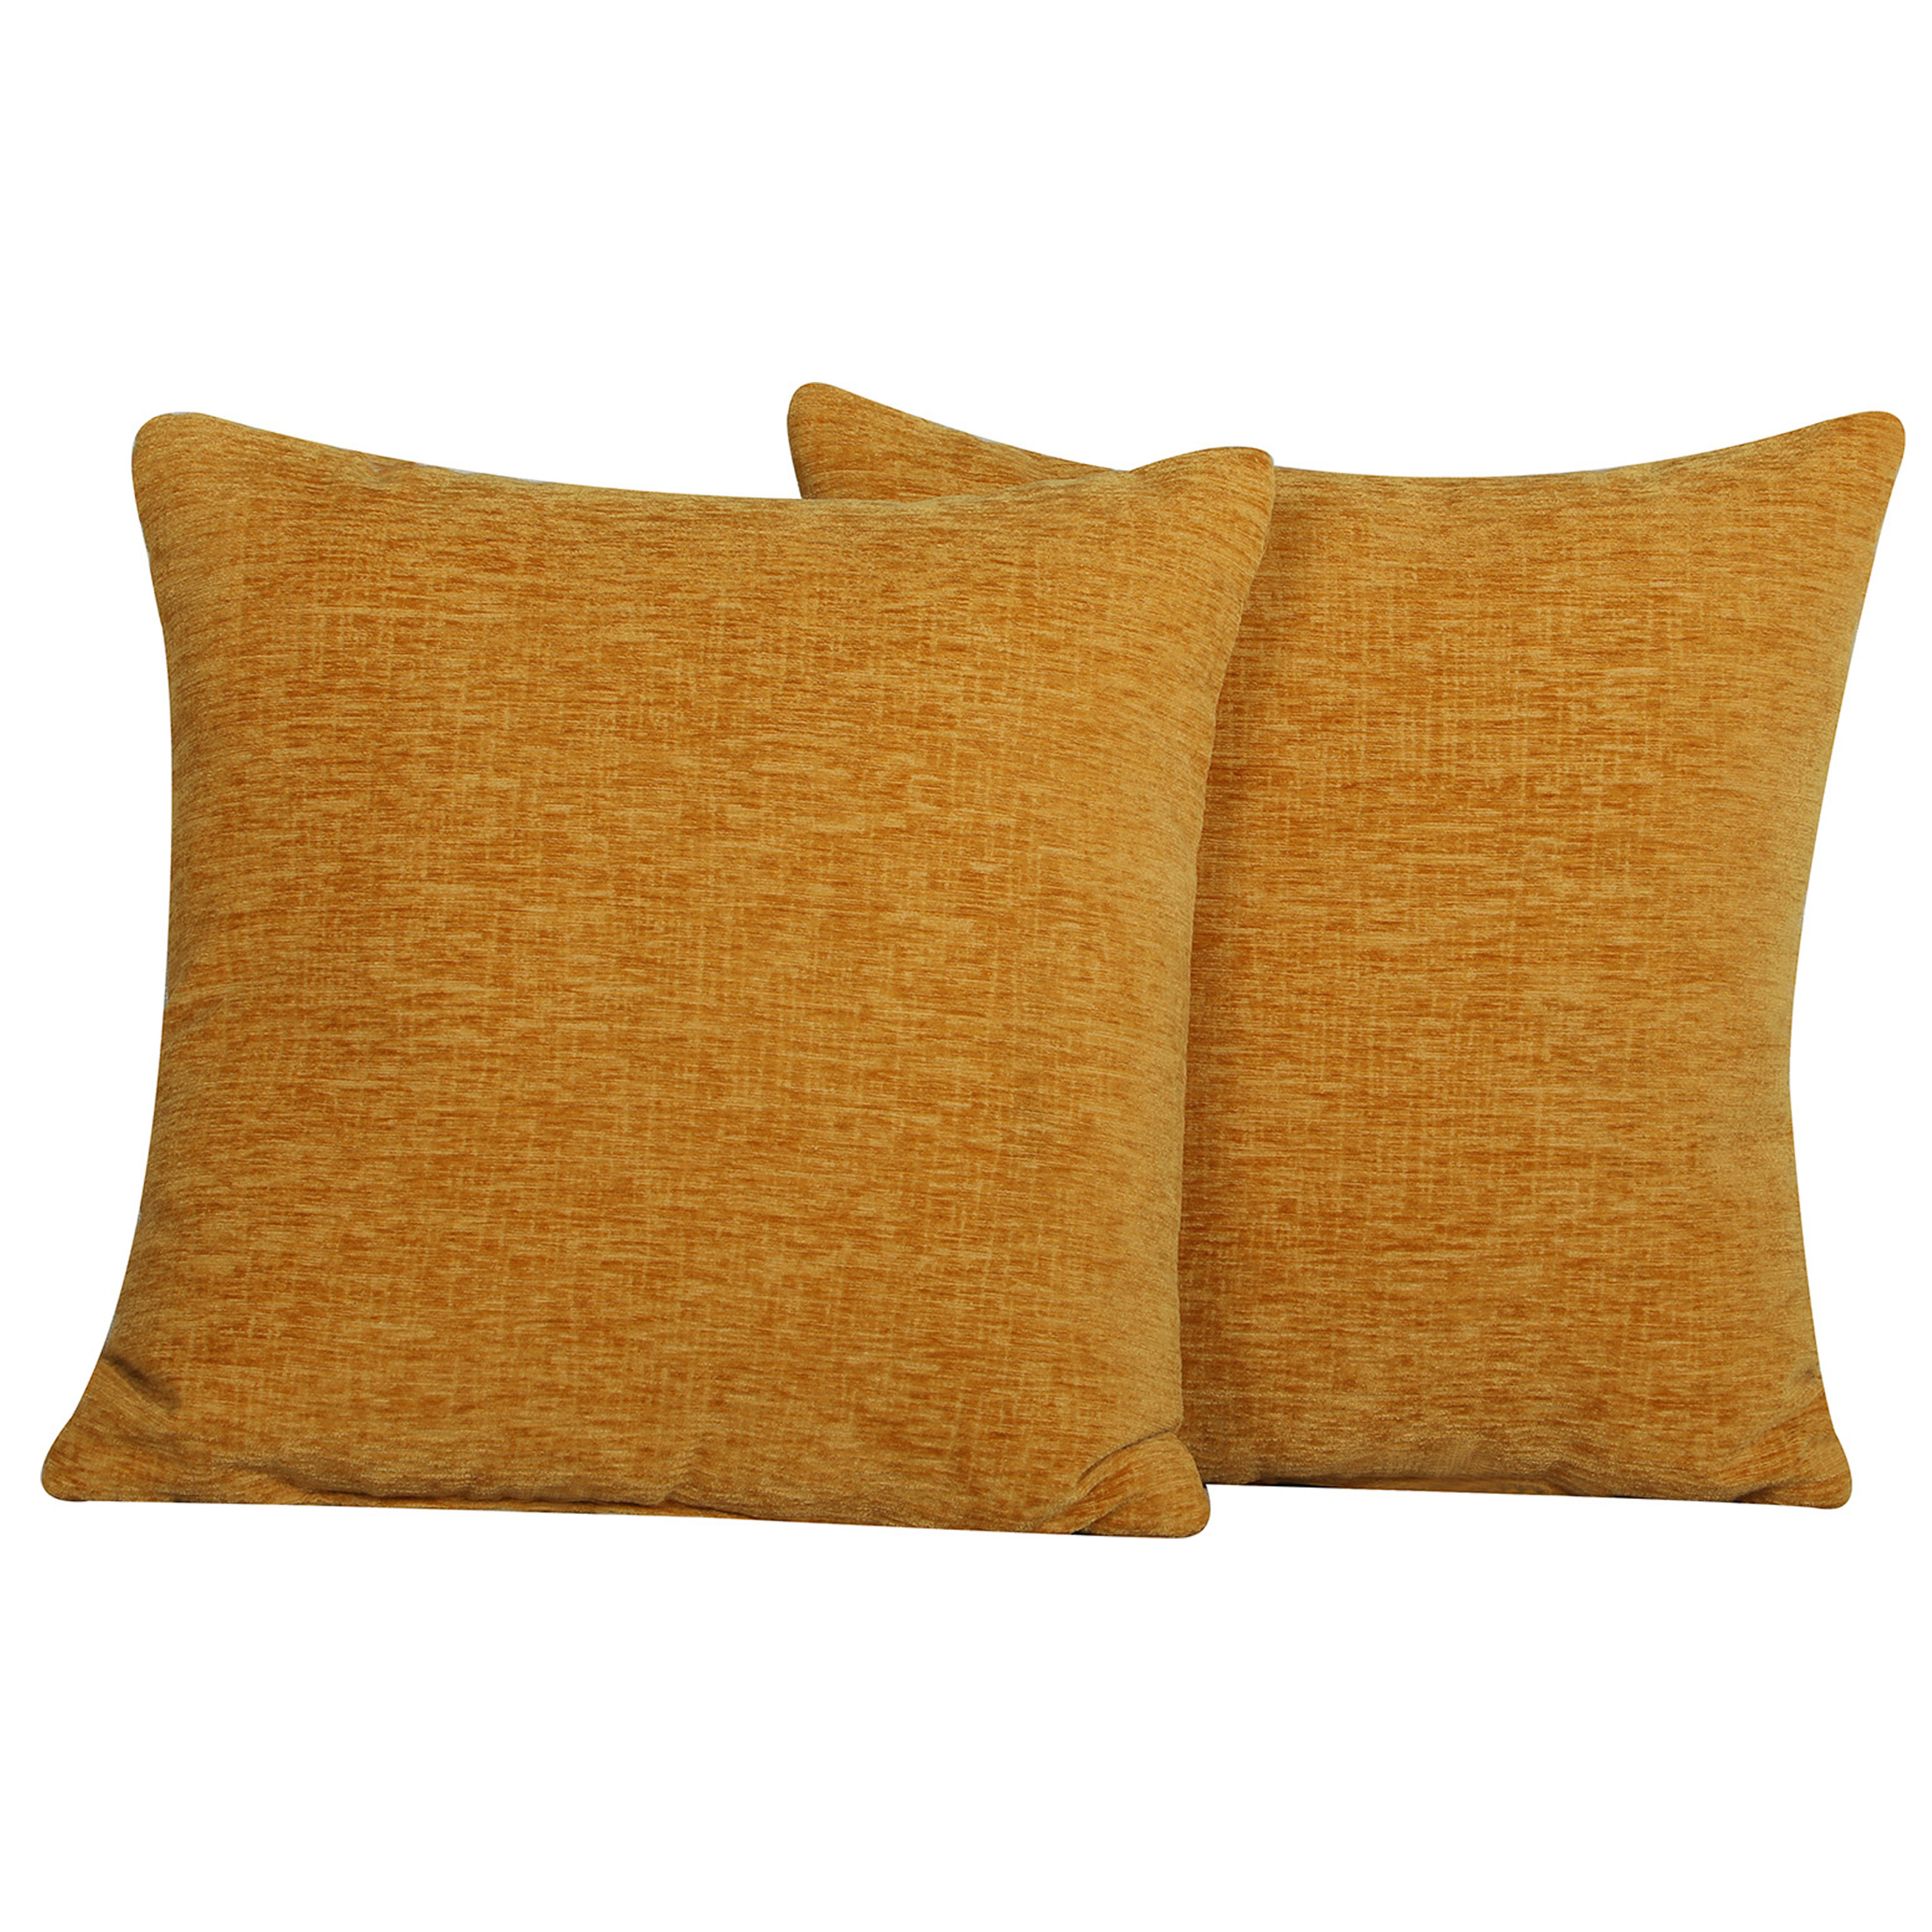 Mainstays Chenille Yellow Pillow 18''x18'', 2 Pack - image 1 of 5